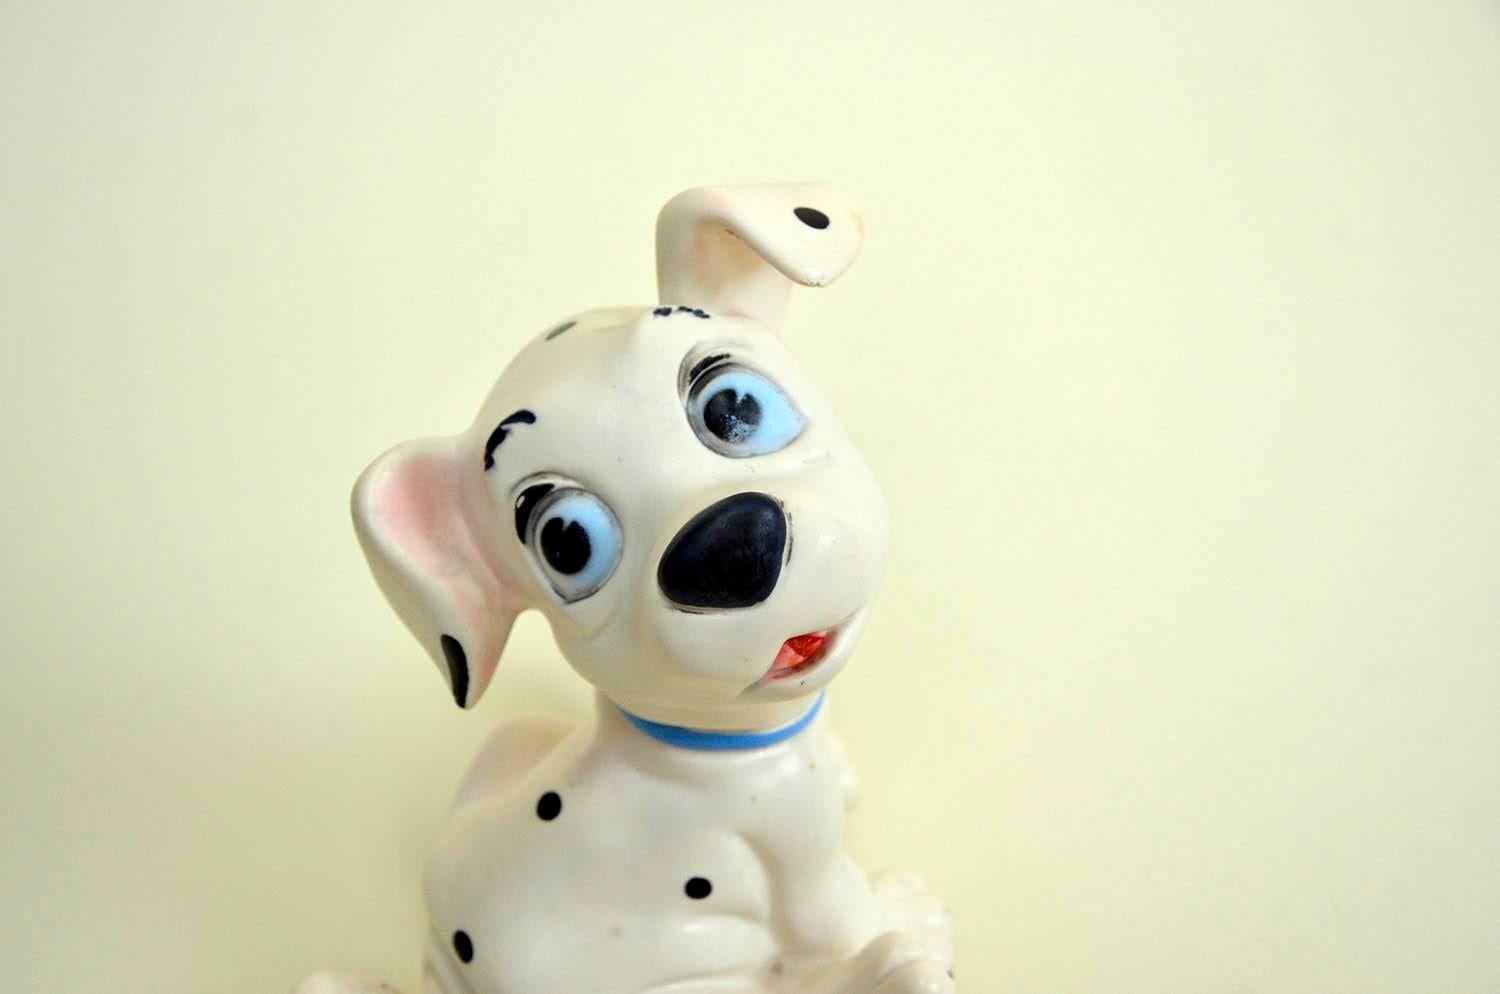 Vintage one hundred and one Dalmatians squeak rubber toy made by Ledraplastic Italy in the 1960s.

Marked Walt Disney Production on the back and stamped with Ledraplastic elephant symbol.

Collector's note:

In 1962, the company Ledraplastic